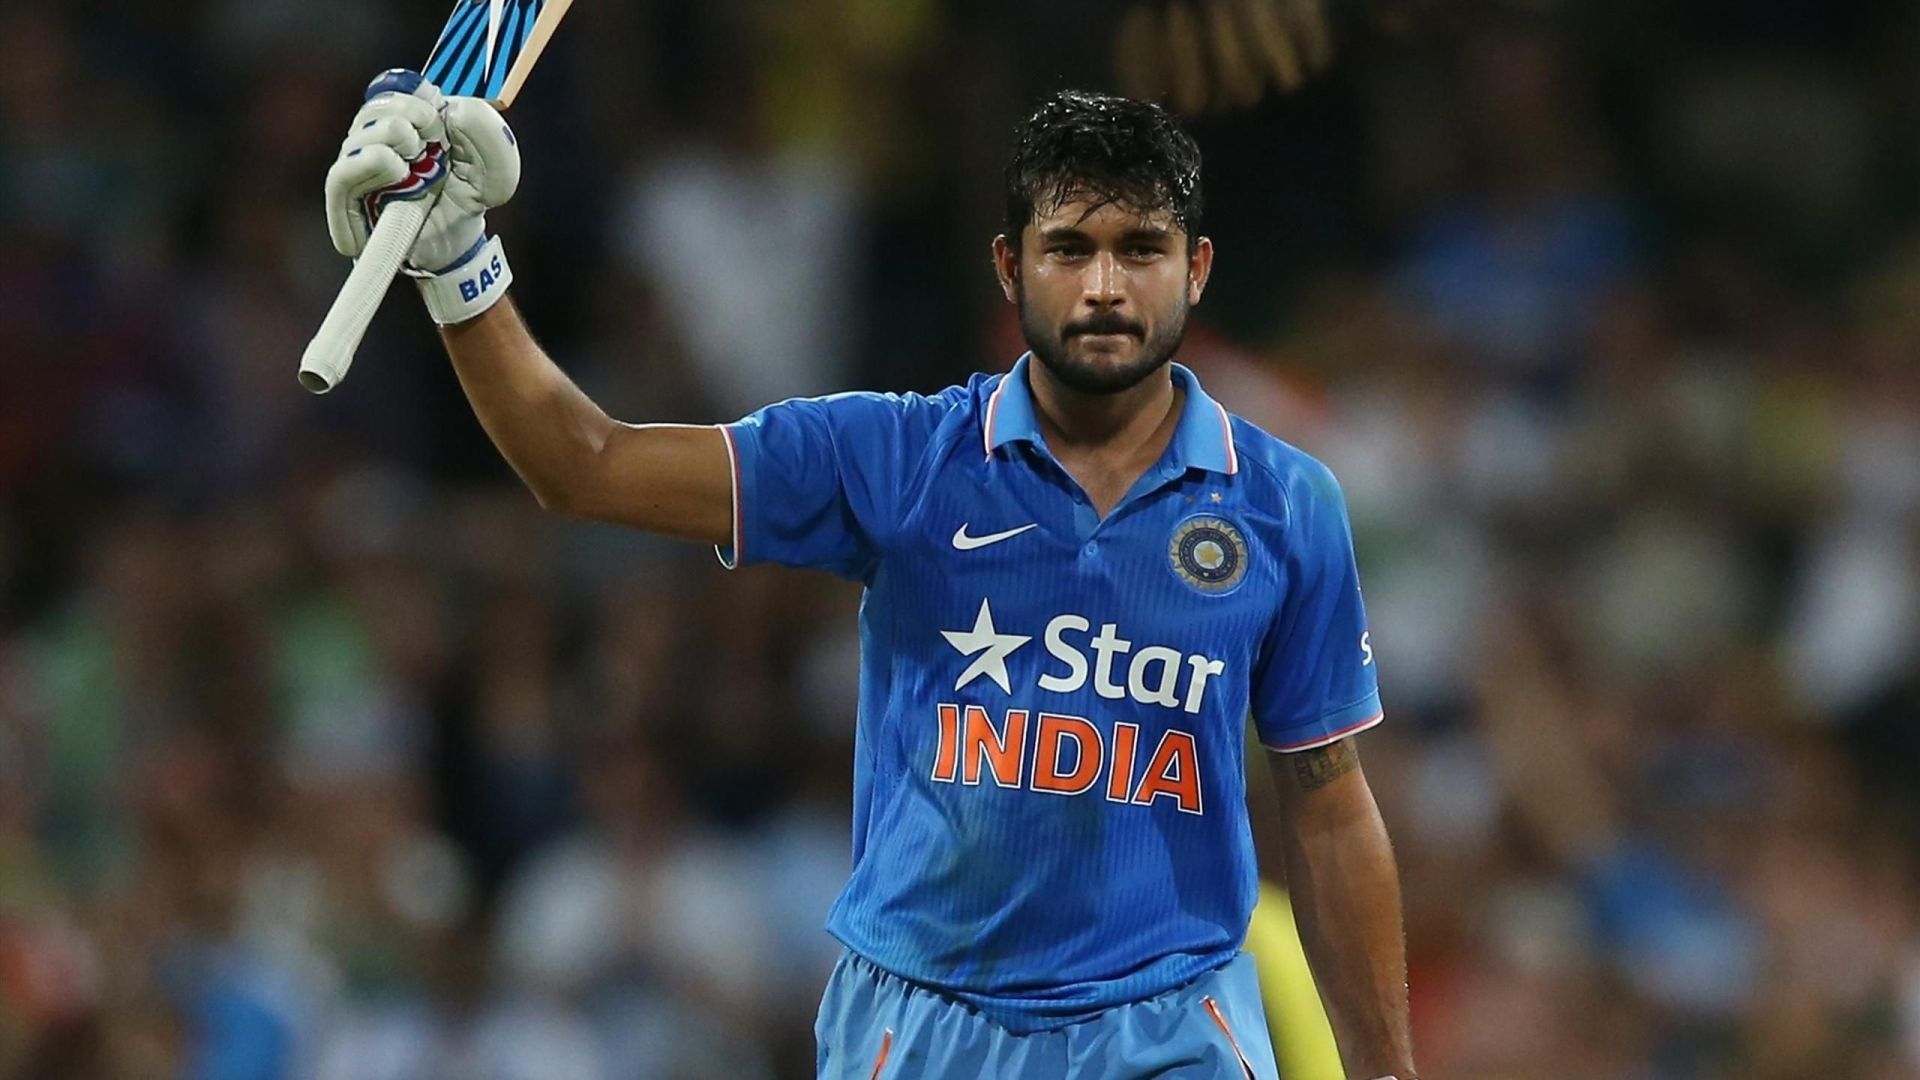 Manish Pandey notched up his maiden century